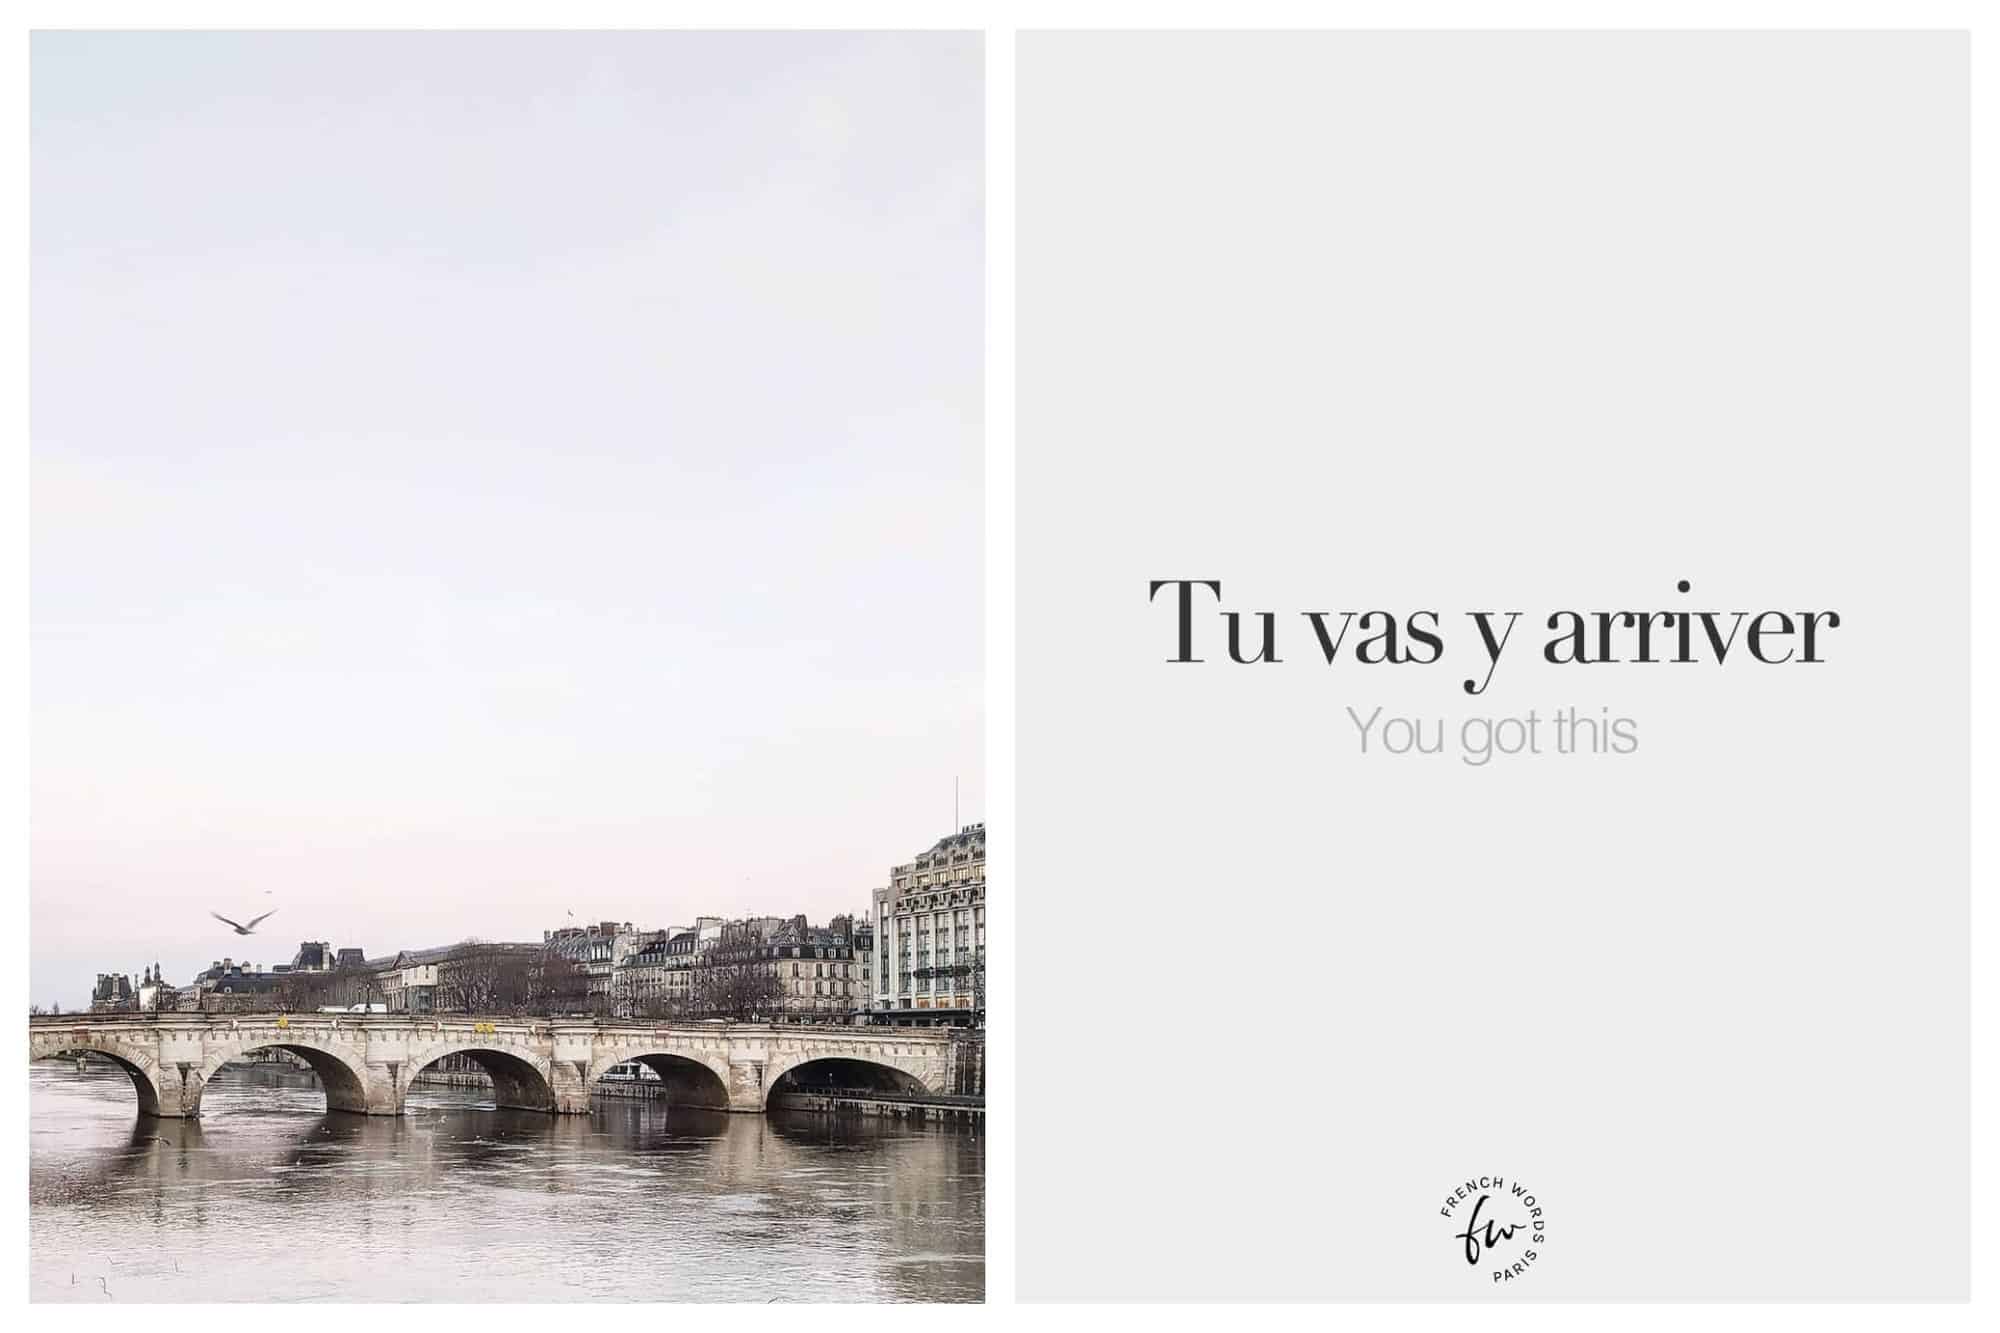 Left: A picture of a bridge in Paris on an early morning. A seagull can be seen flying towards the bridge. Right: text in both english and french that says tu vas y arriver / you got this. 